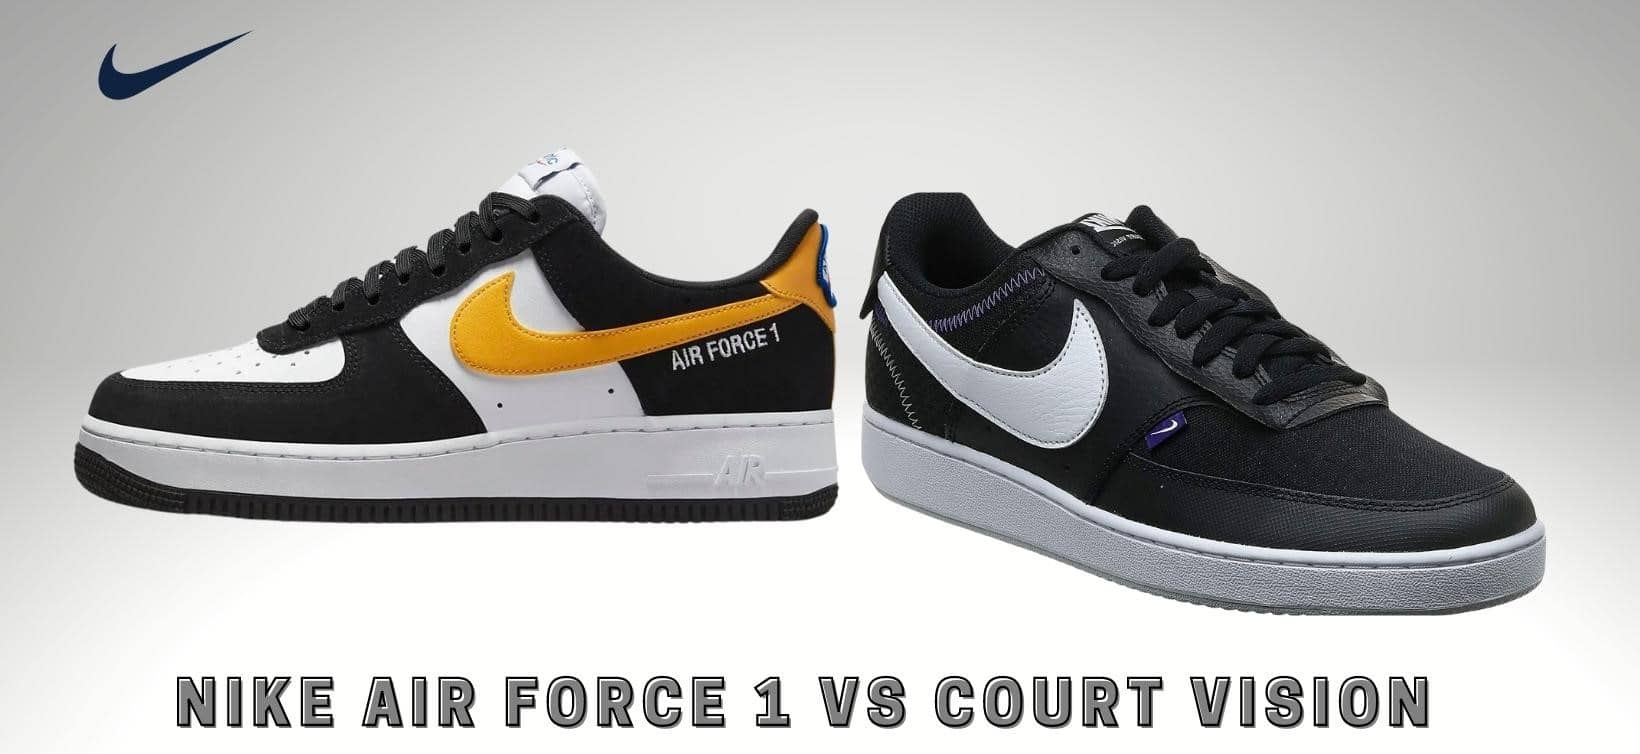 Nike Air Force 1 vs Court Vision